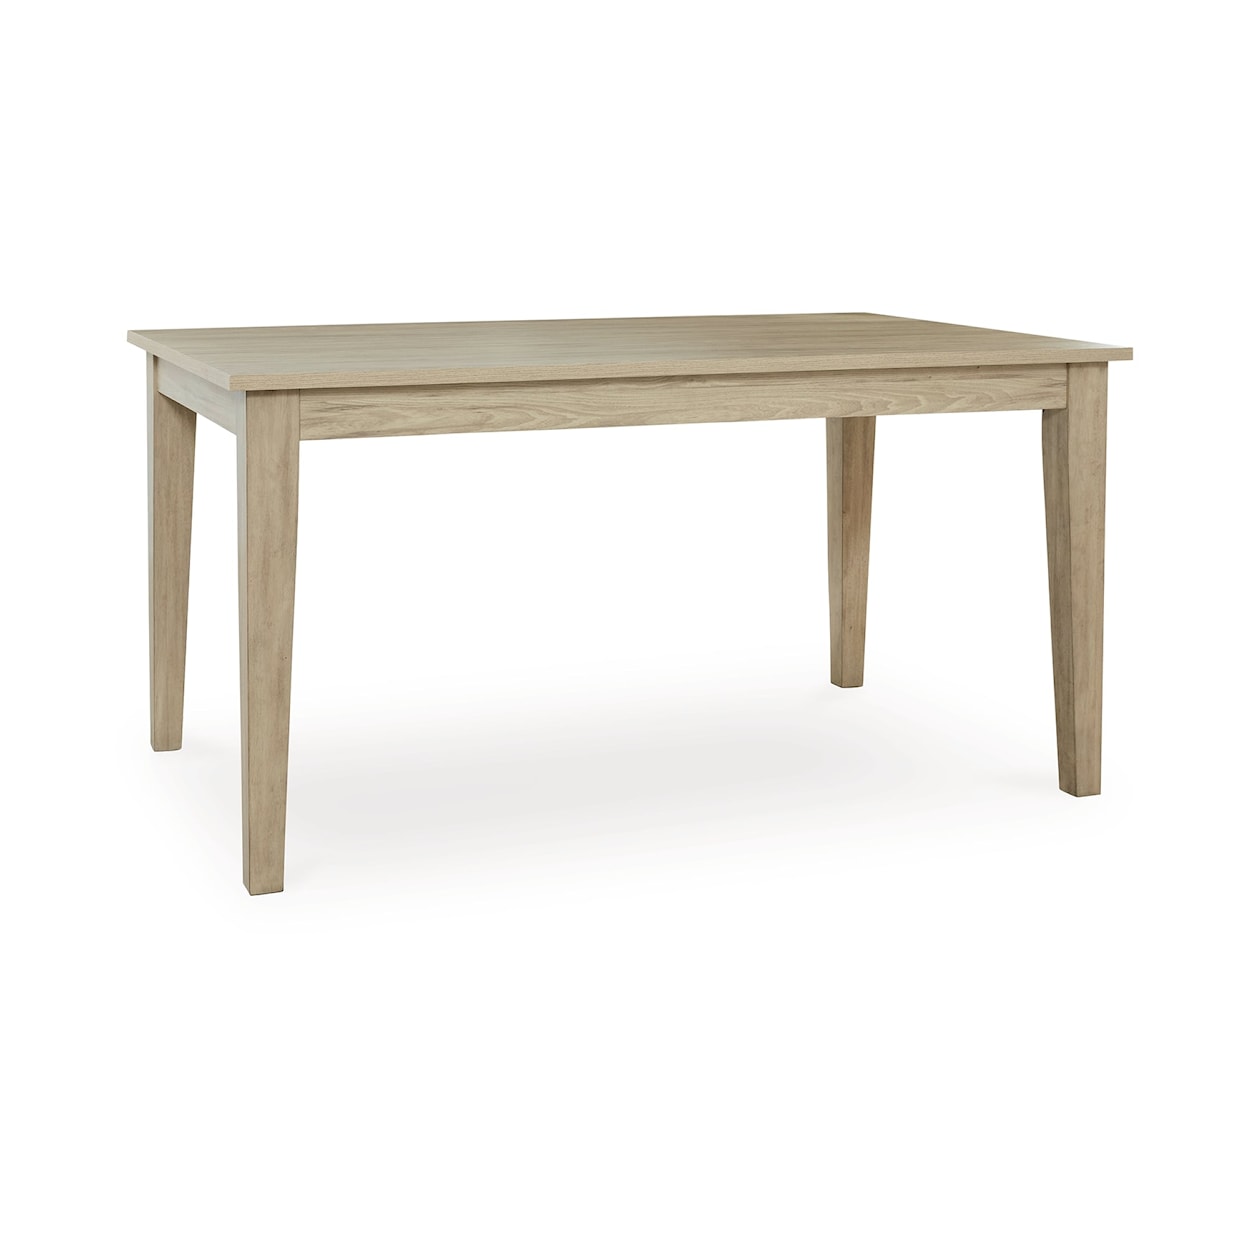 Michael Alan Select Gleanville Dining Table